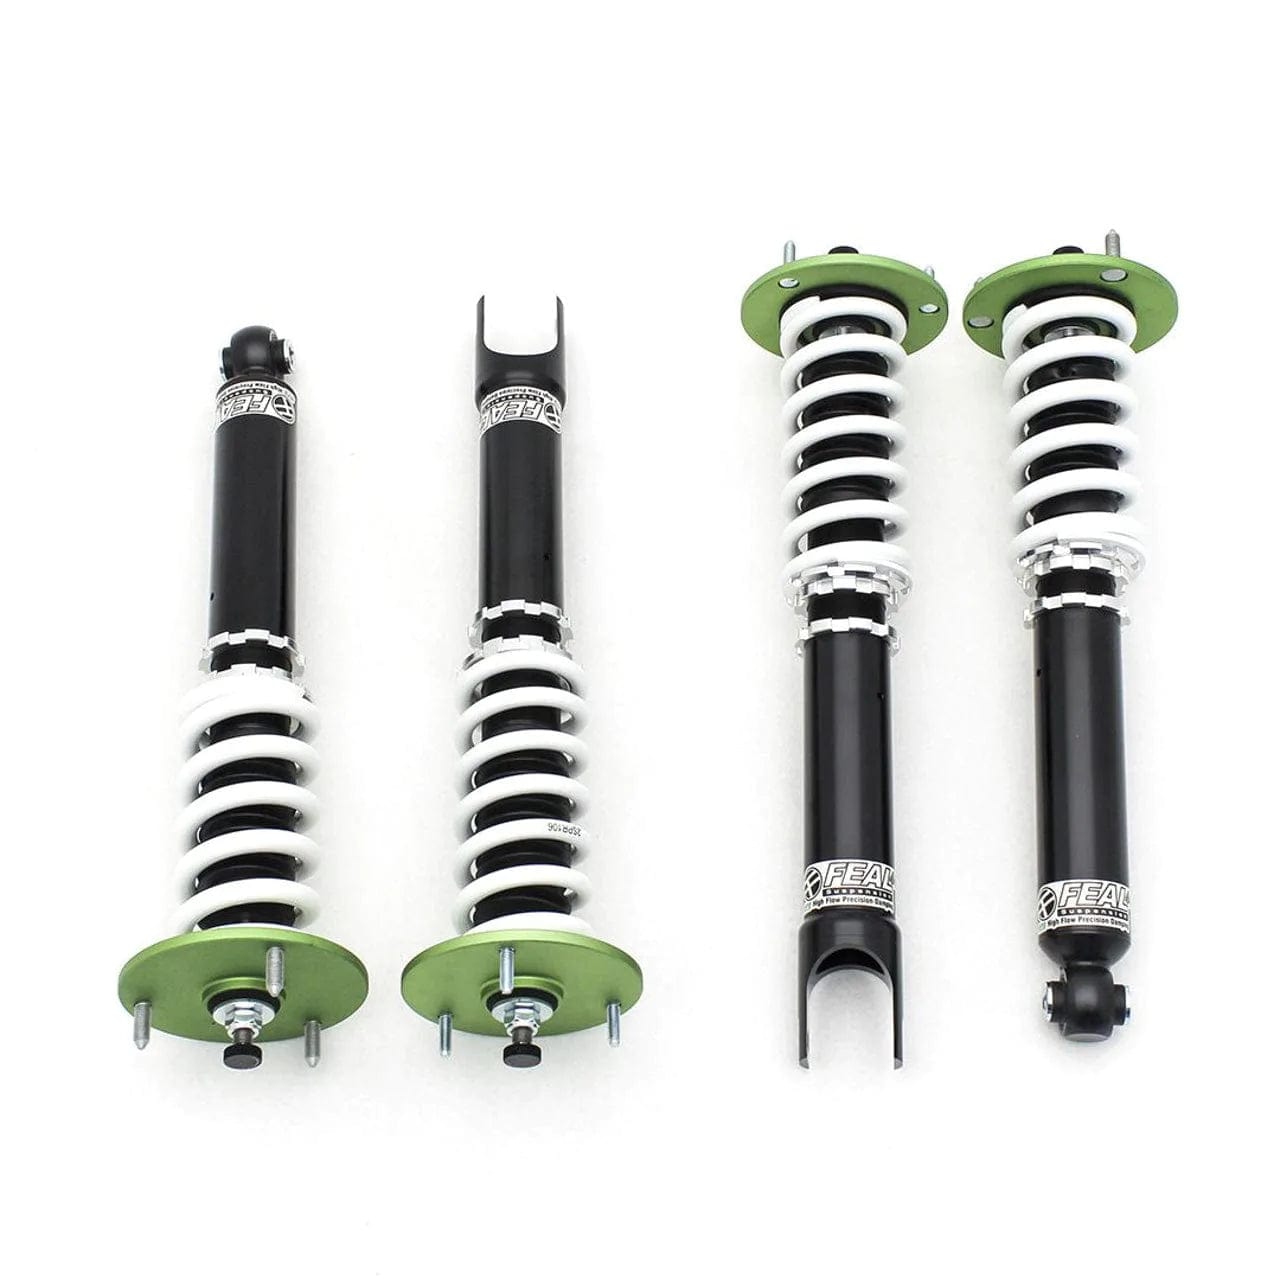 Feal 441 Heavy Front Coilovers (True Rear) - 1994-2004 Ford Mustang SN95 441FO-02HT